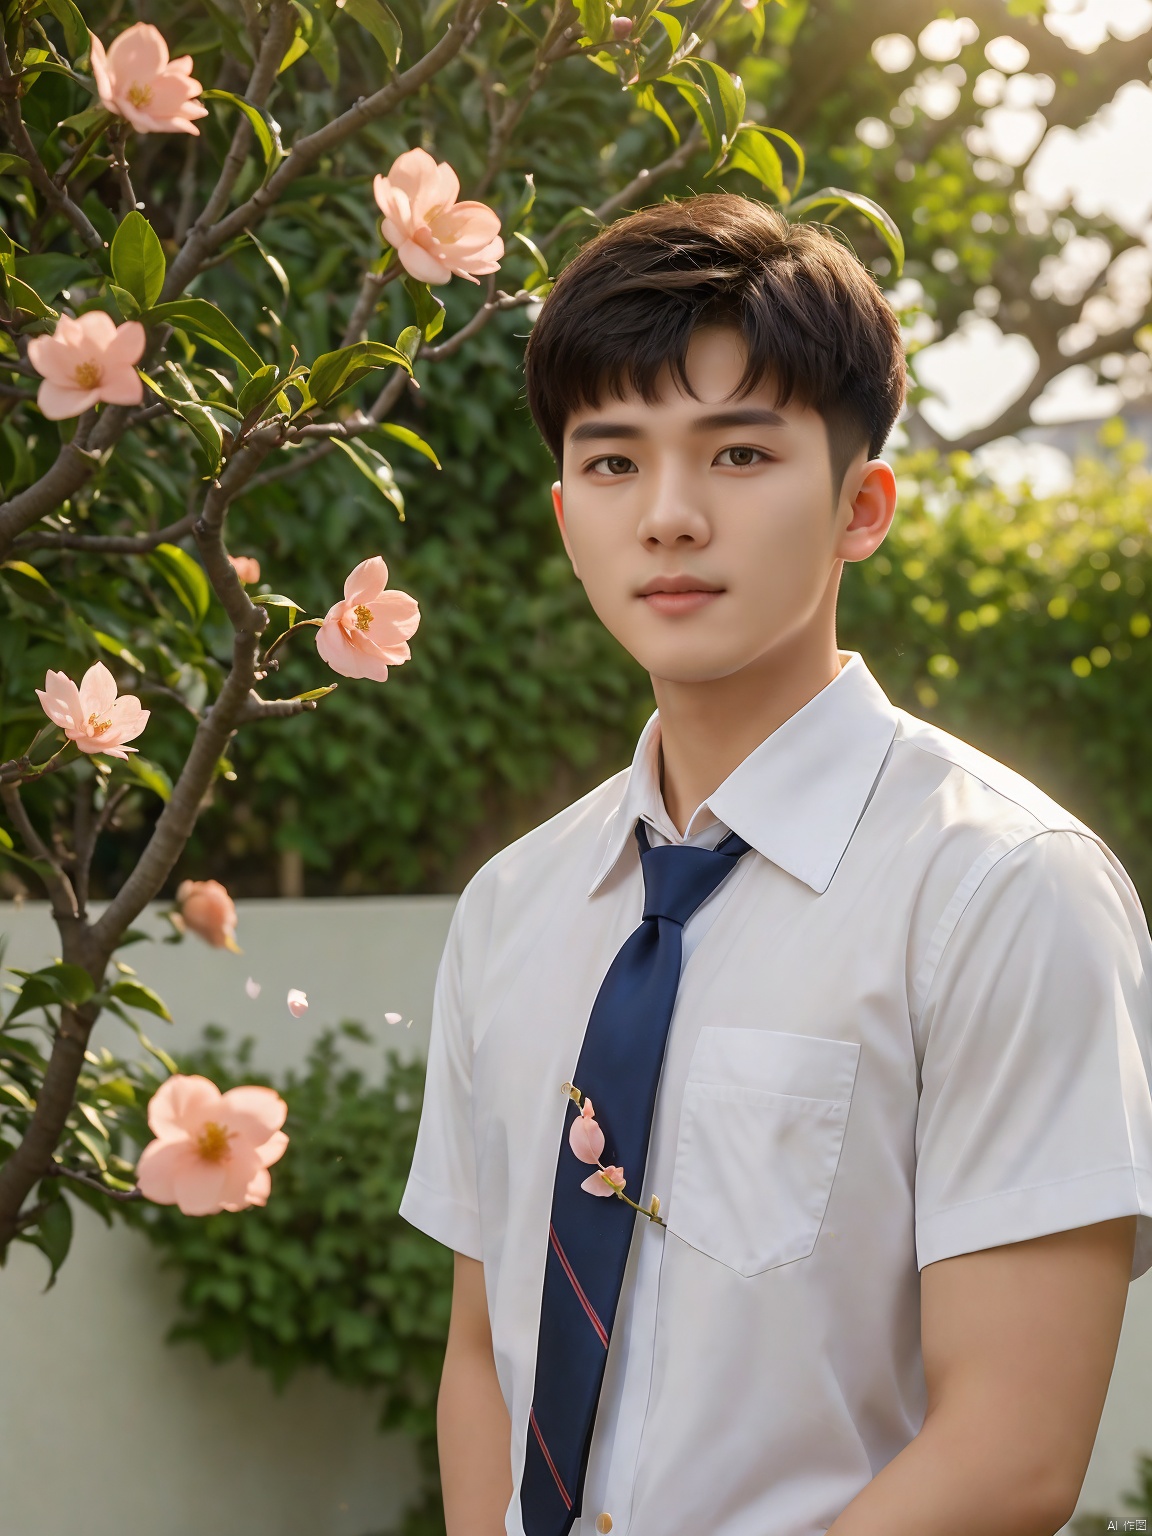 masterpiece,1 boy,Young,Lovely,Handsome,Look at me,Short hair,Tea hair,Students,School uniform,White shirt,Tie,Outdoor,Garden,Peach tree,Flying petals,Light and shadow,HDR,Close-up,textured skin,super detail,best quality,solo,,